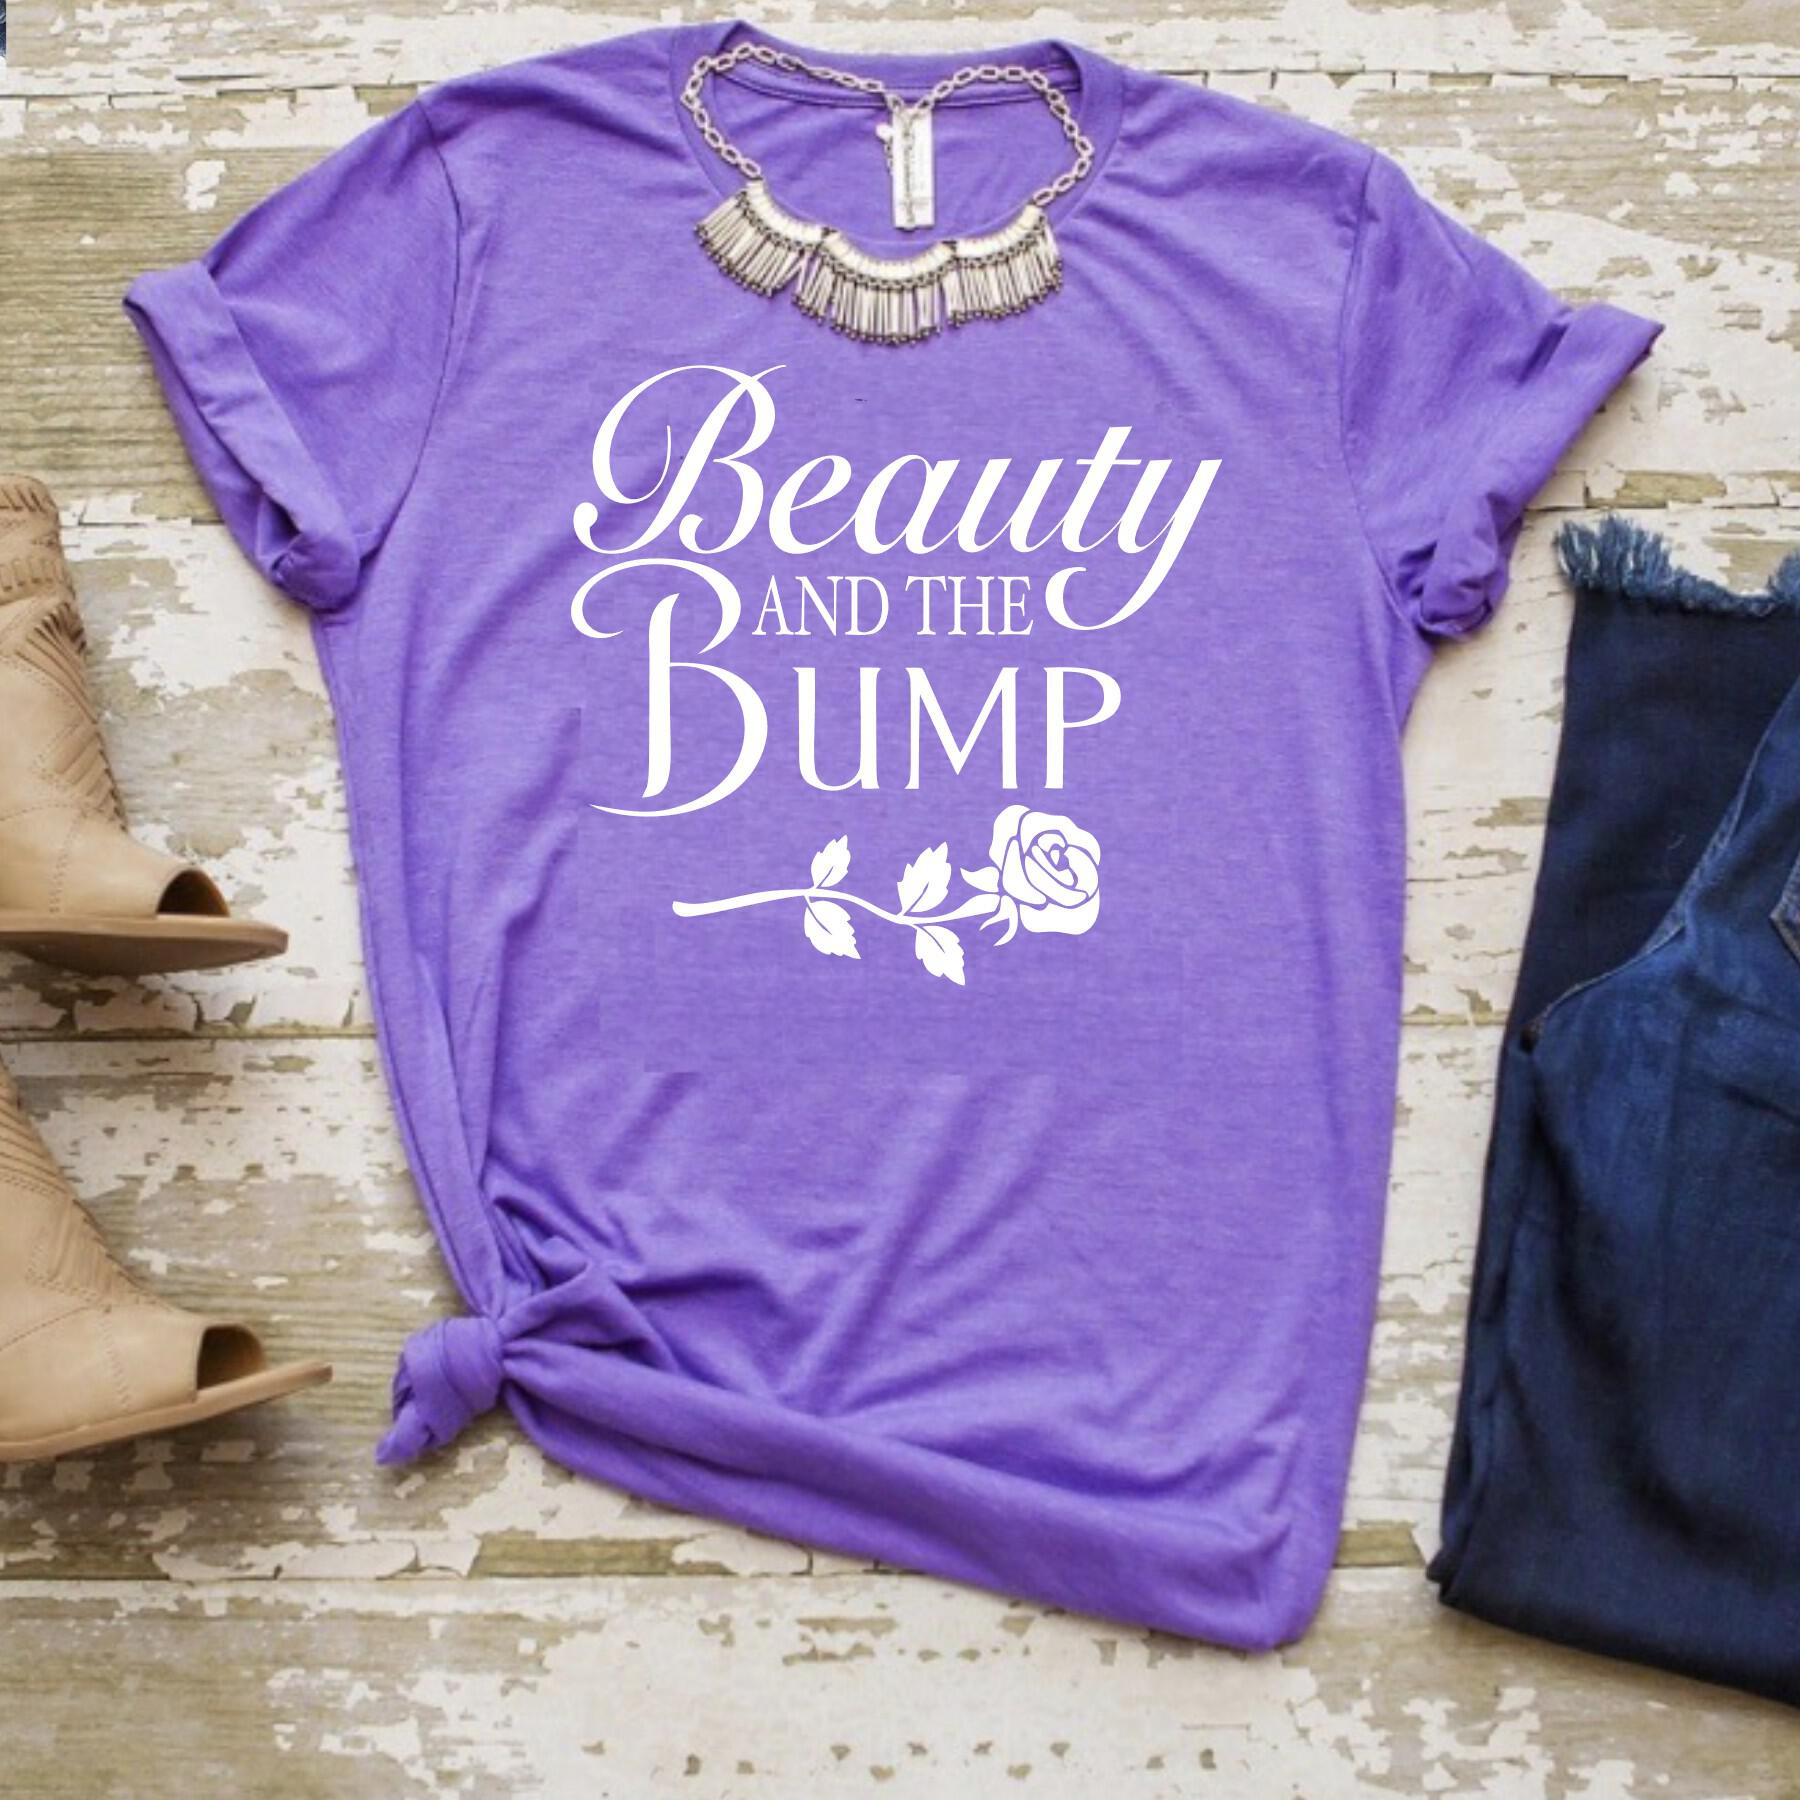 What The Bump Wants The Bump Gets - Maternity Short Sleeve T-Shirt